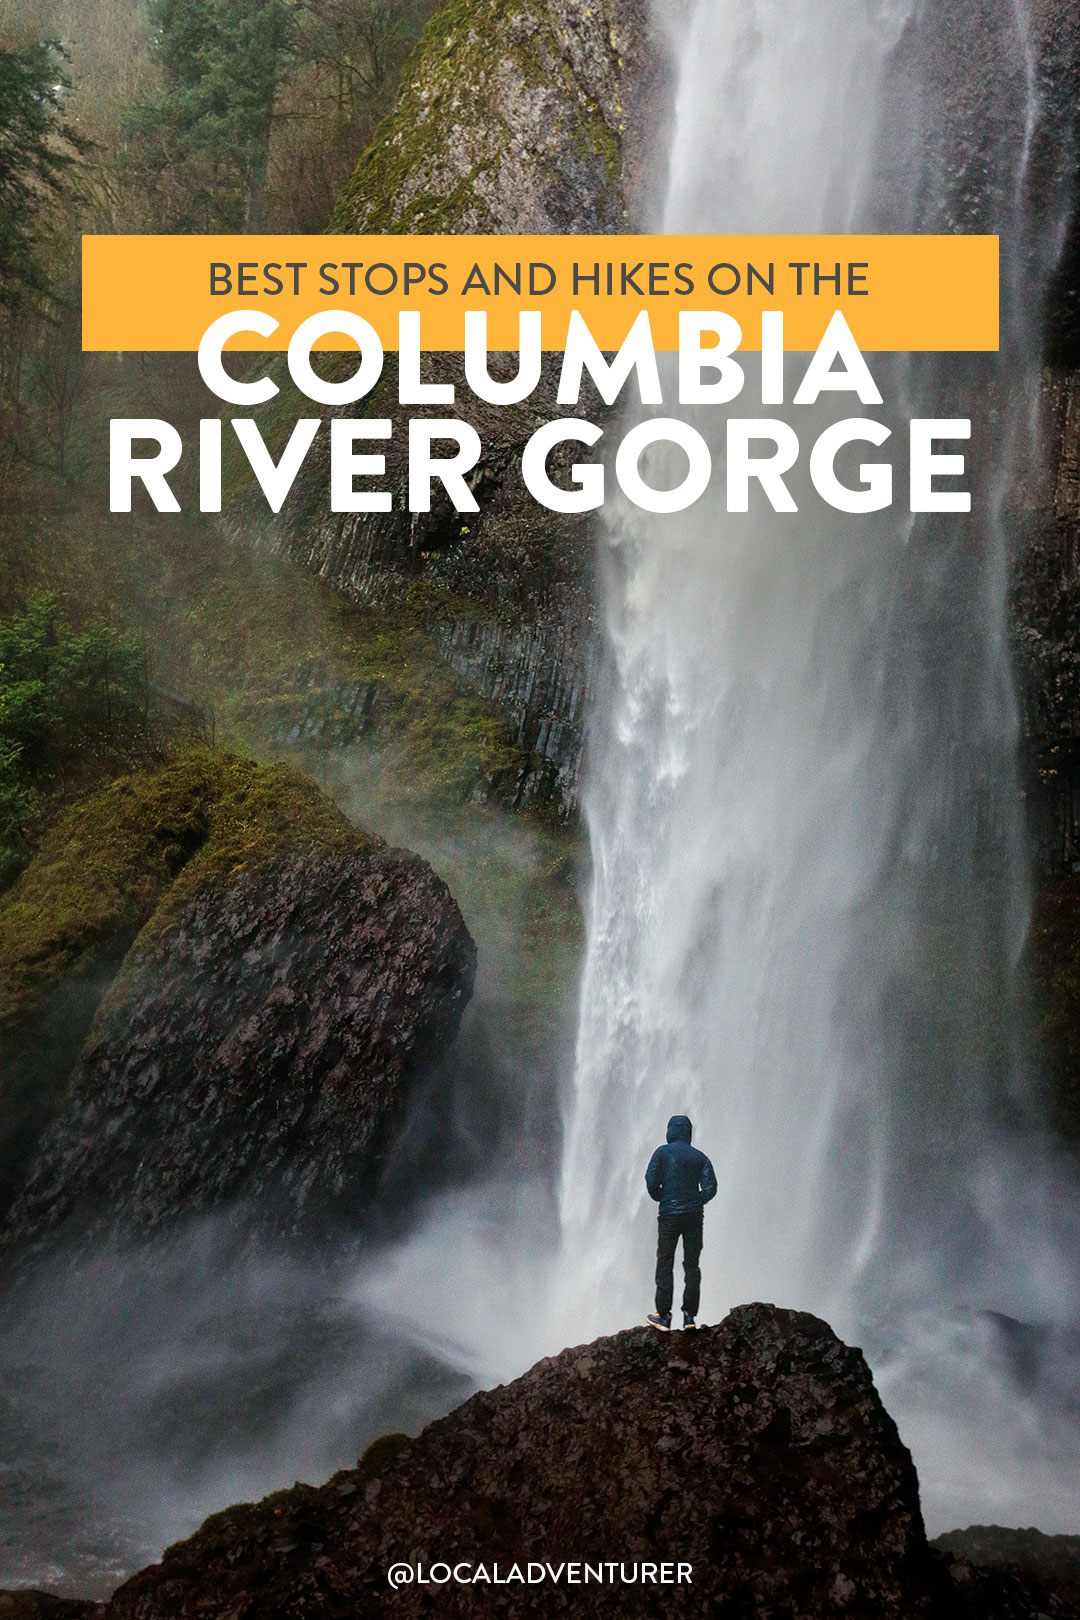 Best Hikes in the Columbia River Gorge Road Trip - Pictured here is Latourell Falls